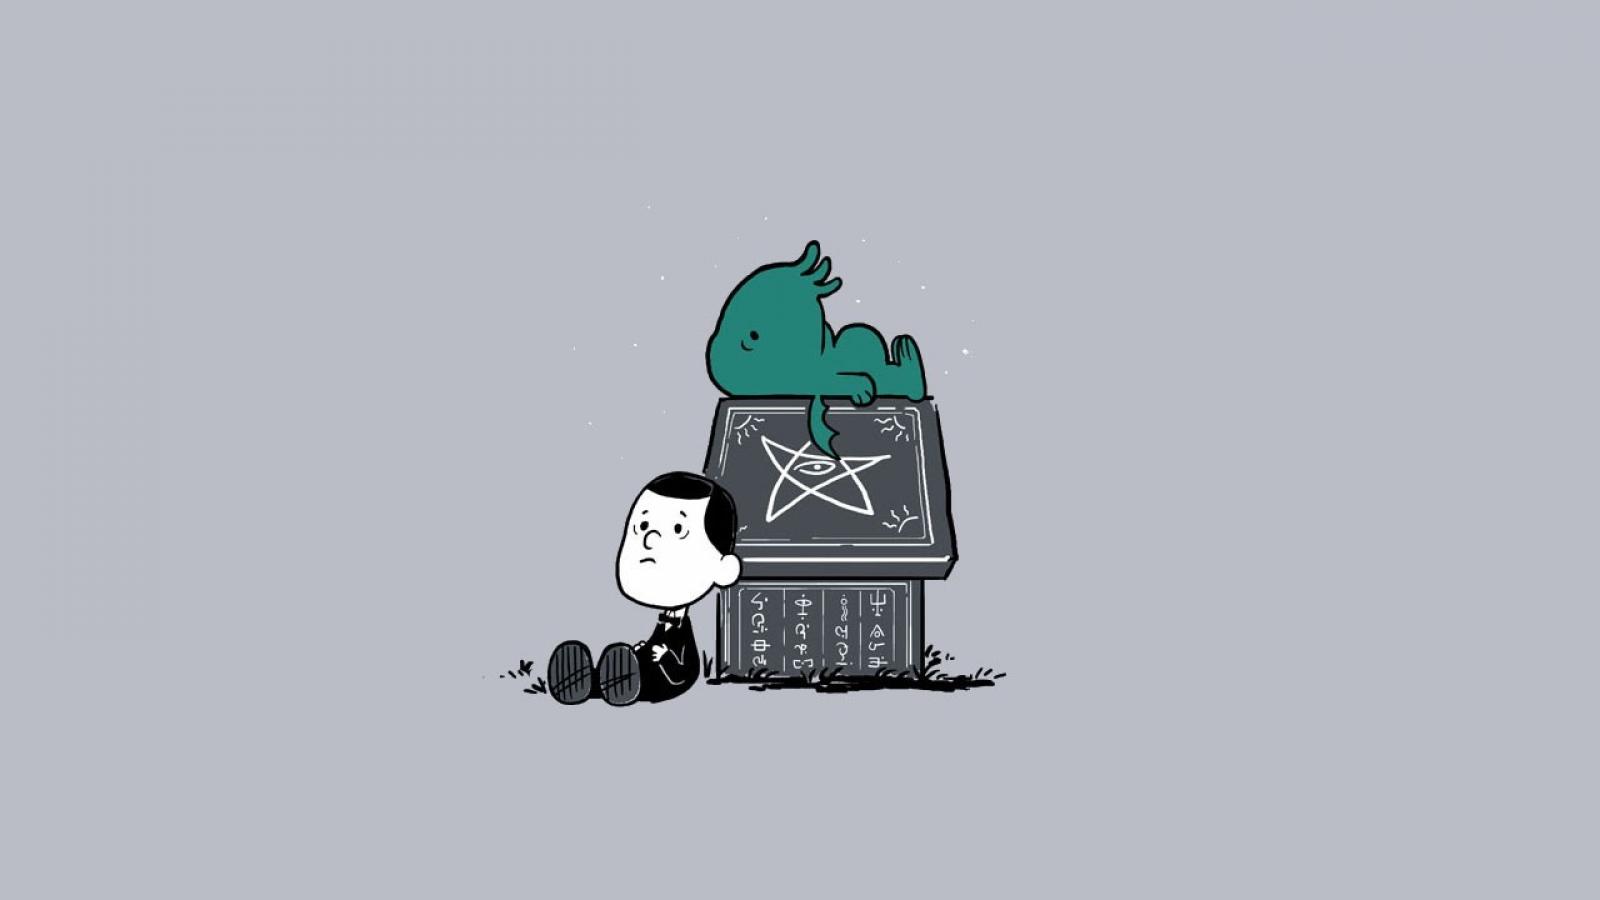 Cthulhu Snoopy Lovecraft Wallpaper